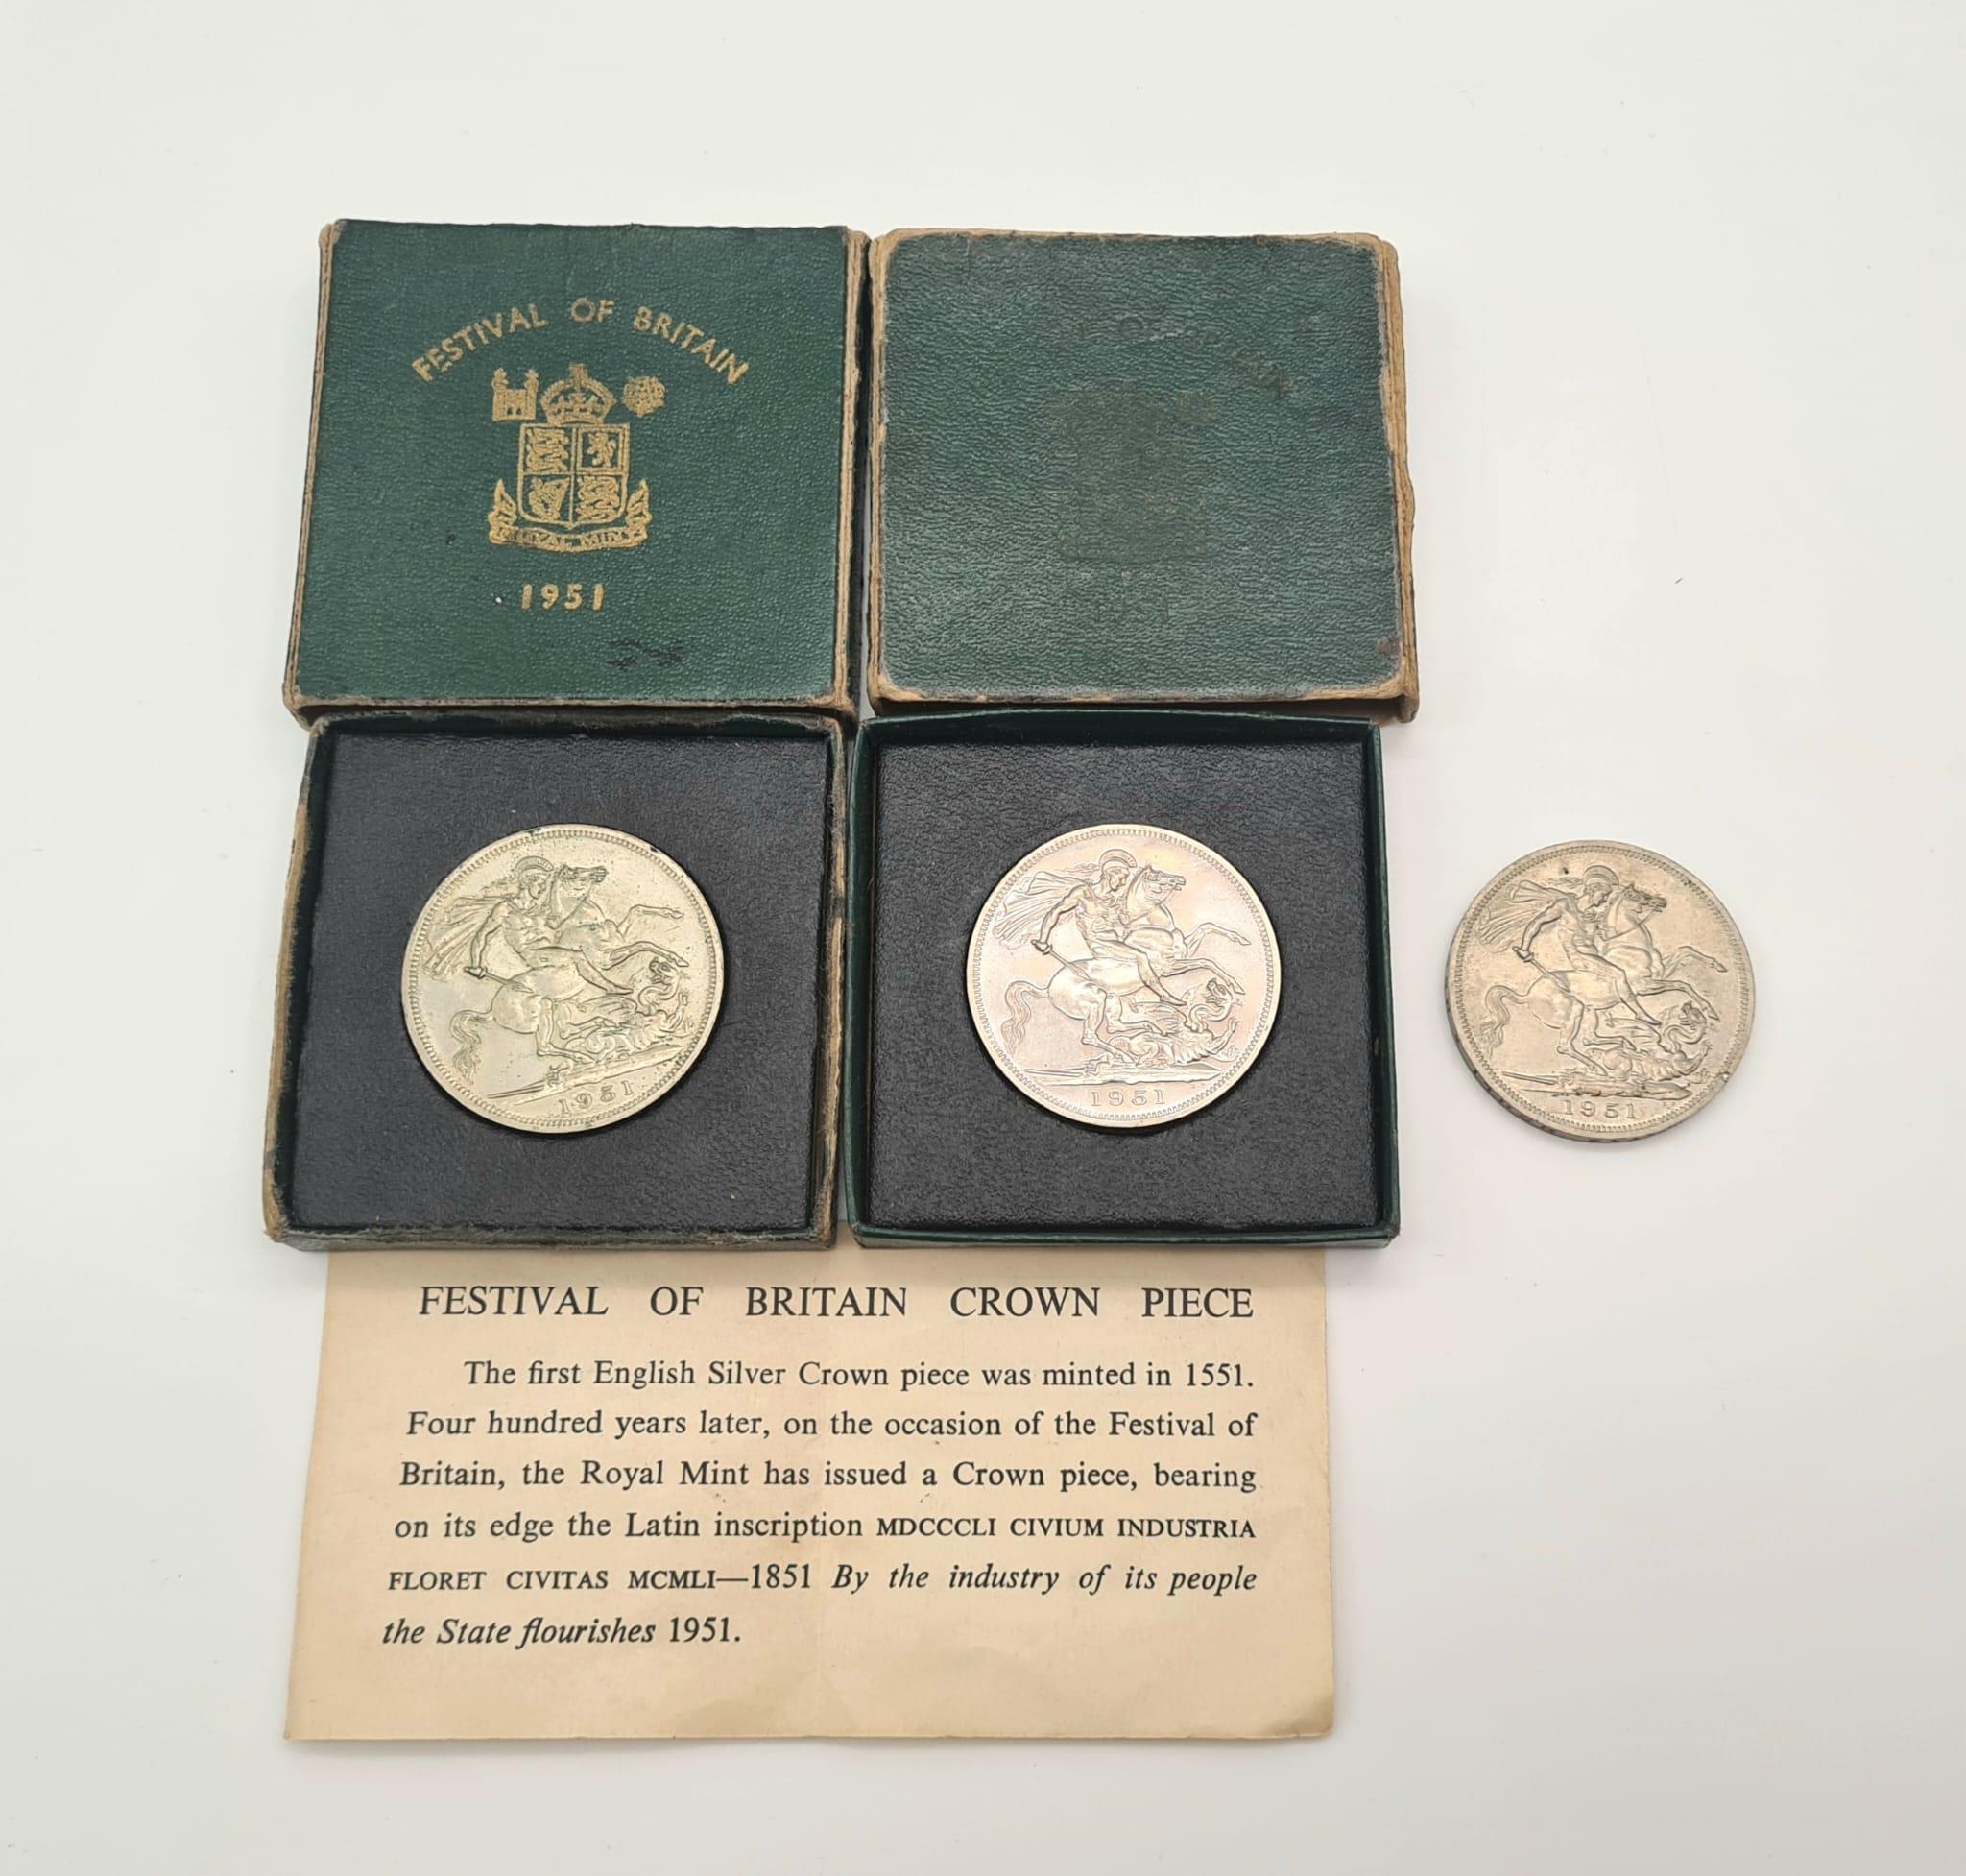 Three Festival of Britain 1951 George VI Crowns. Two in original boxes. Please see photos for